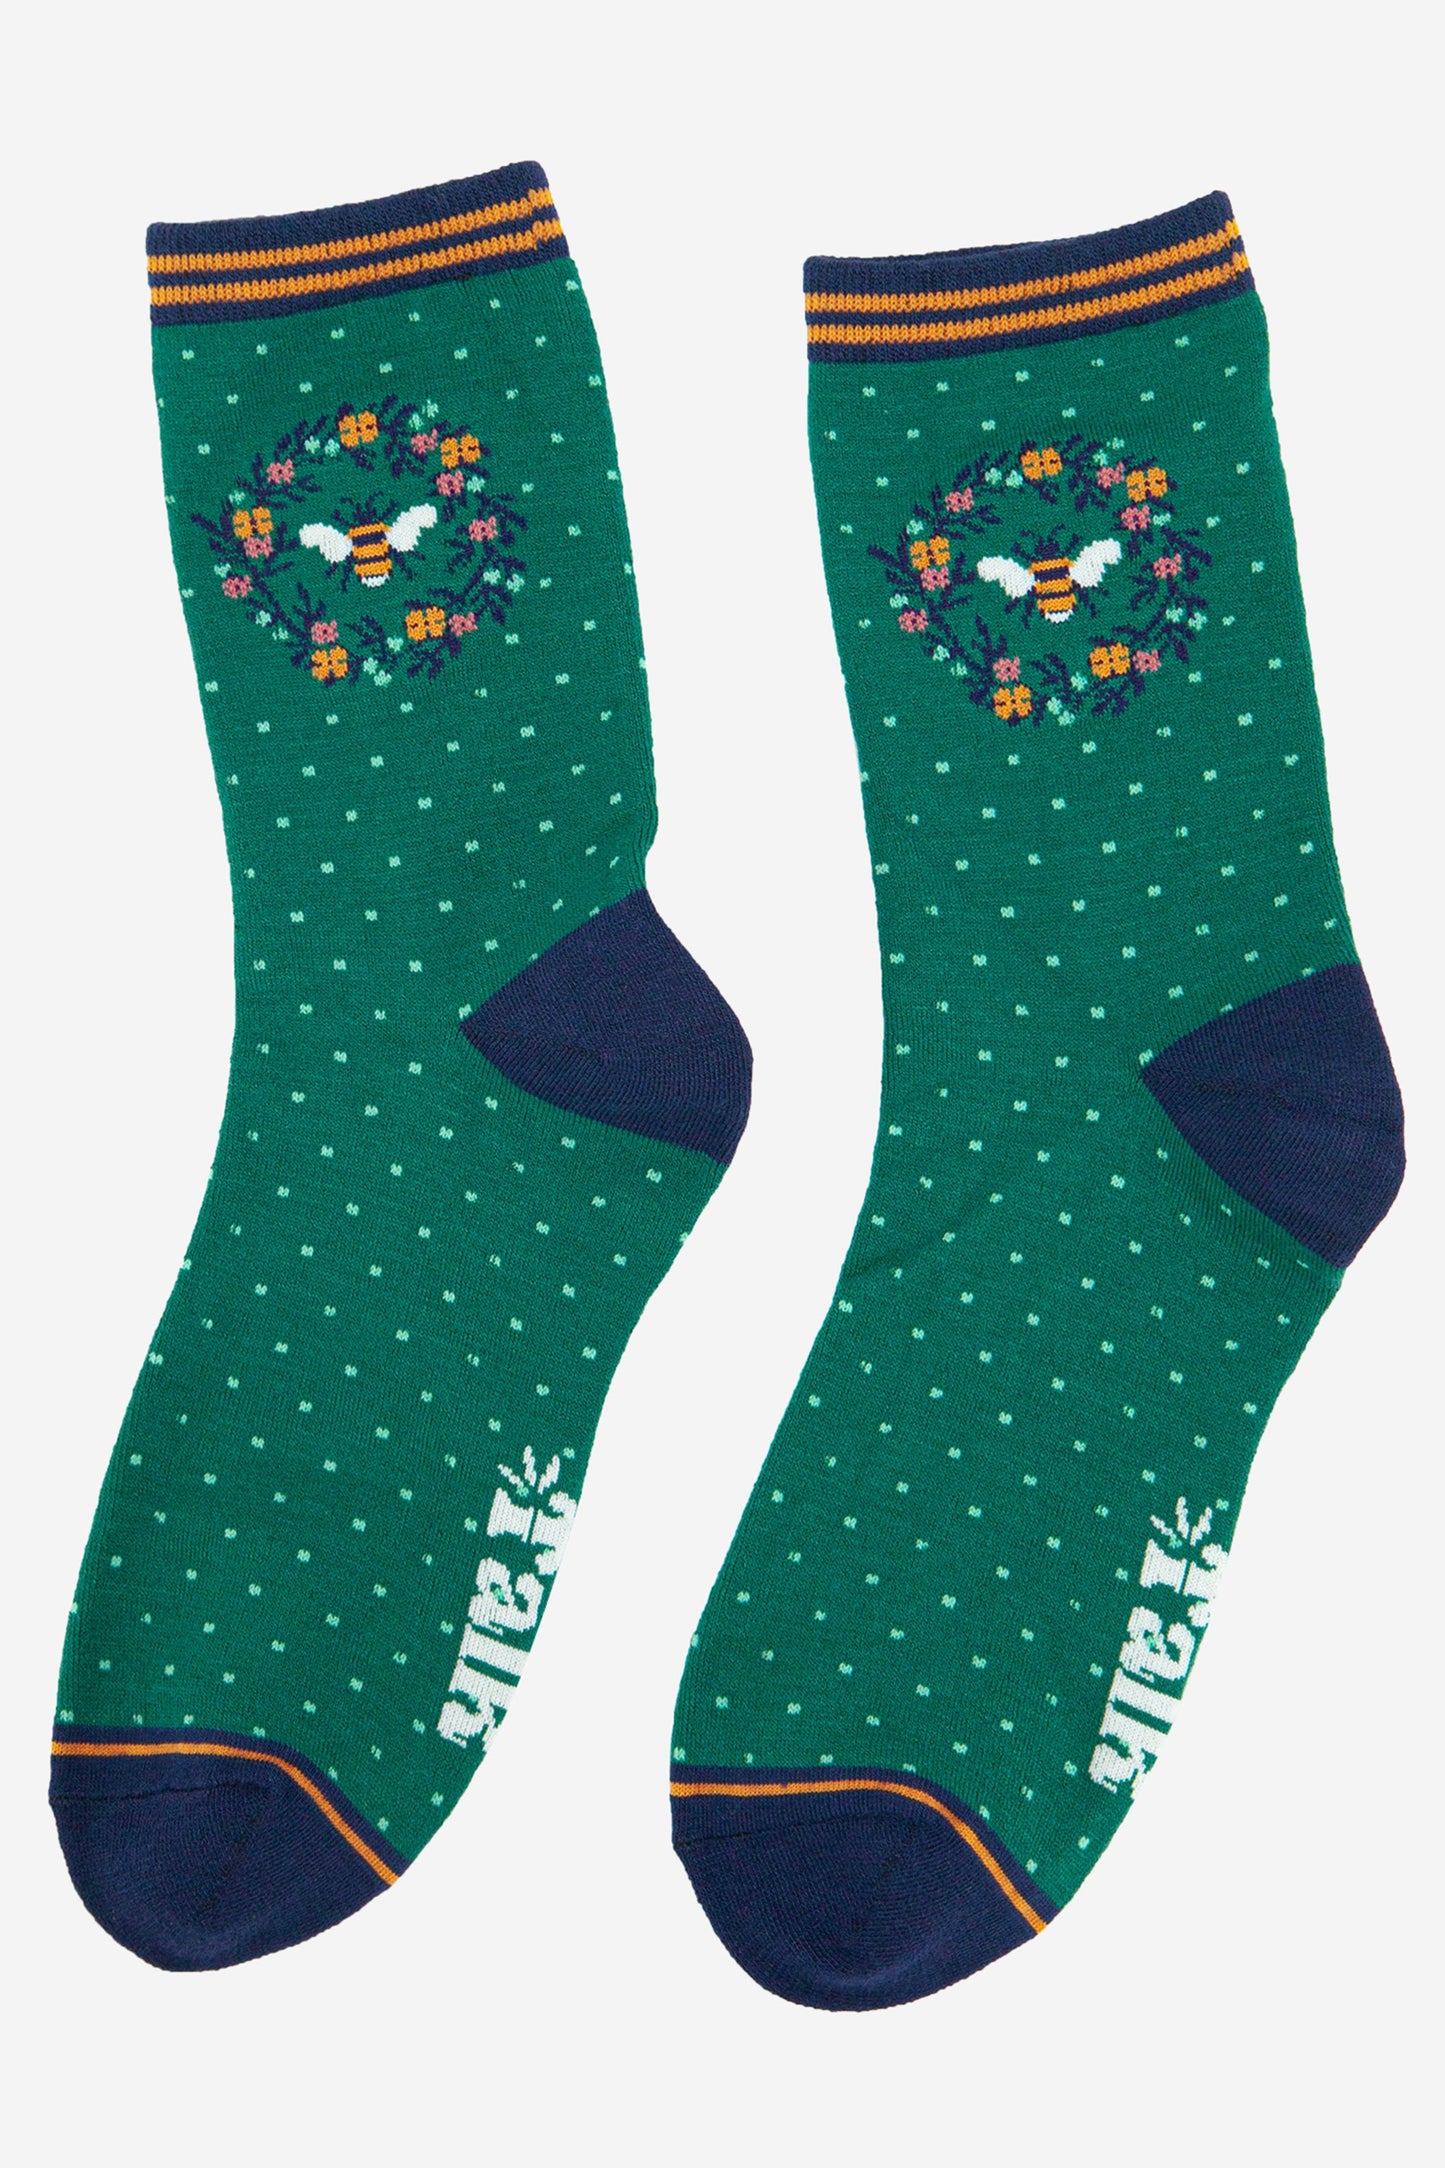 womens green bamboo socks with a honeybee and floral print motif on the ankle